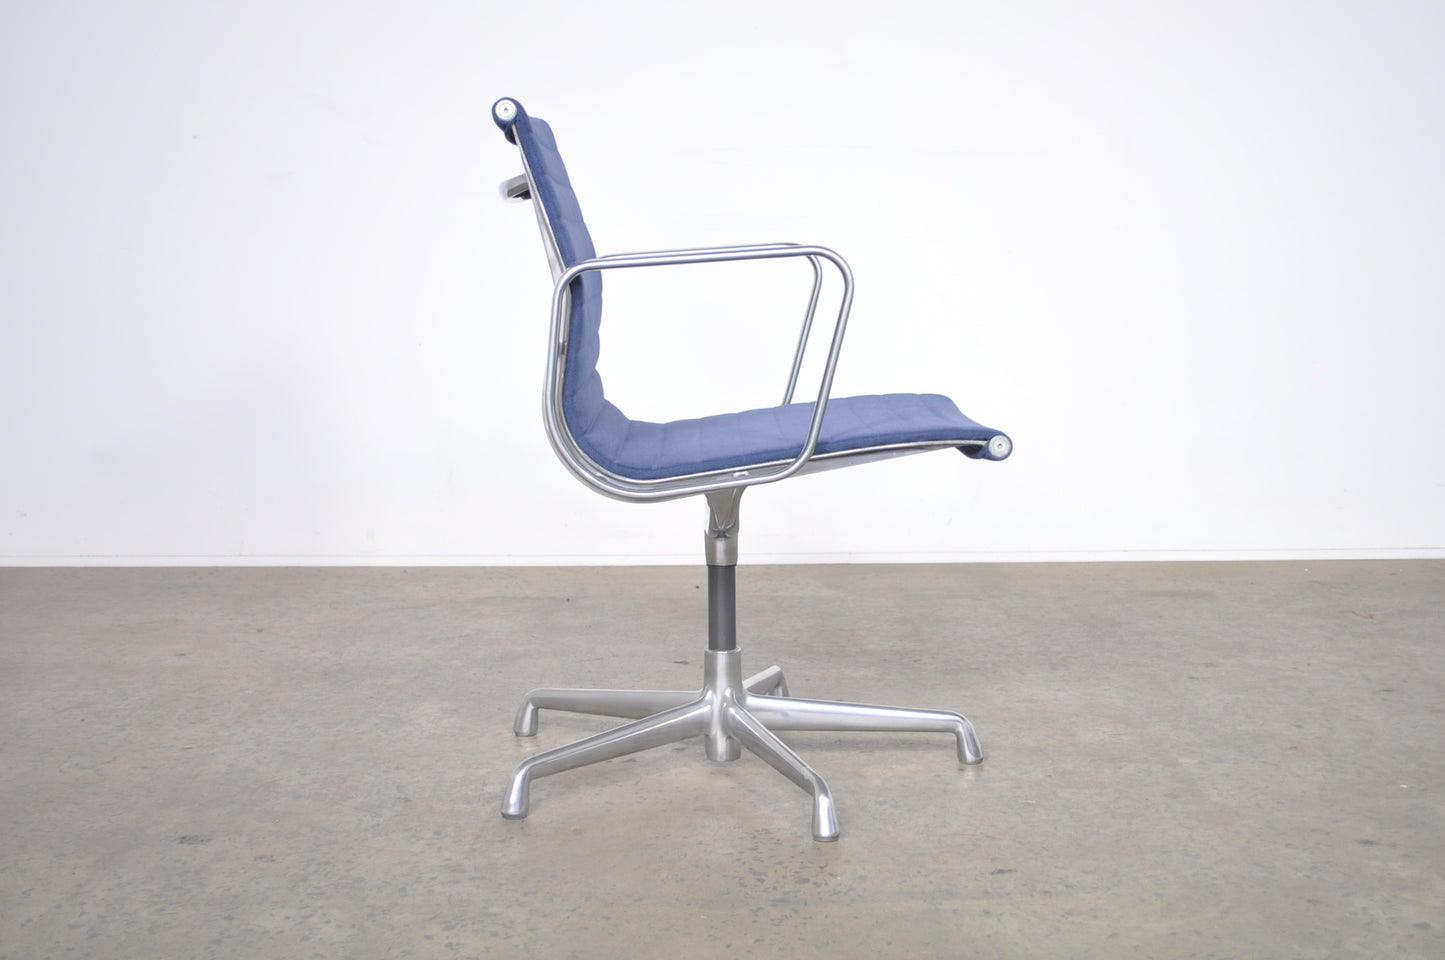 Eames Aluminium Group side chair with arms.